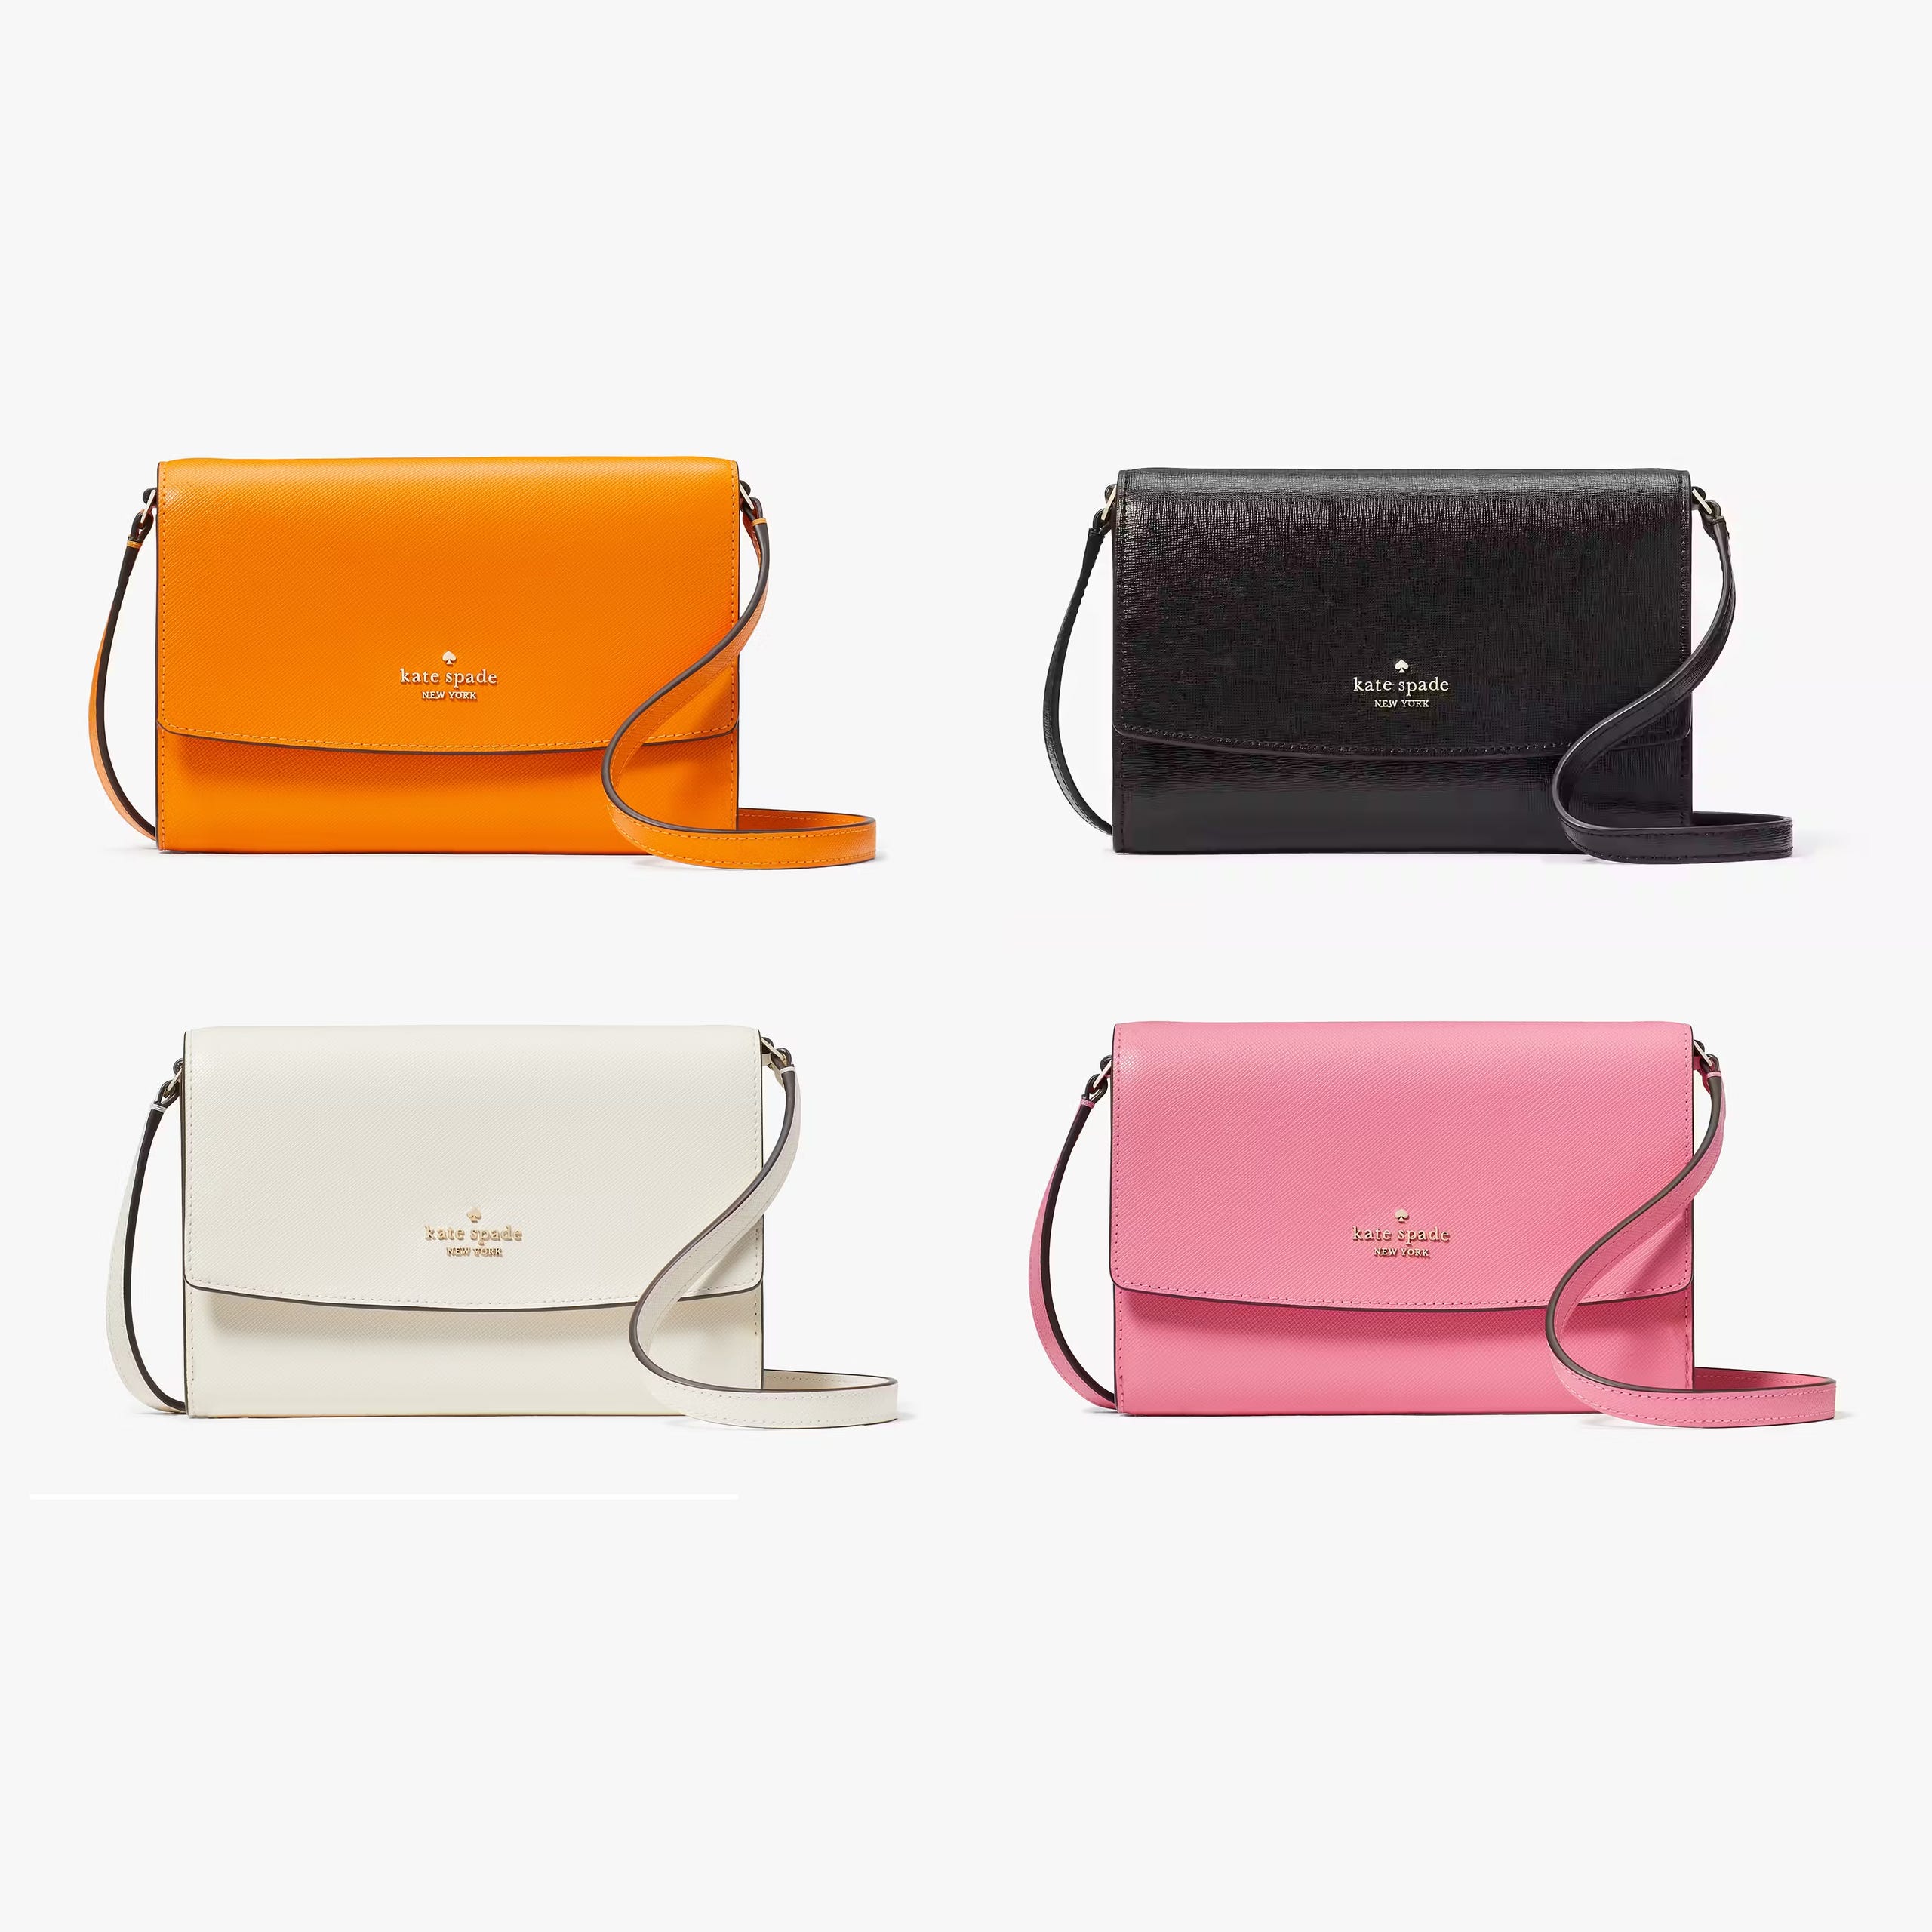 Four shoulder bags in orange, black, white, and pink, each with a long strap and brand logo on the front.